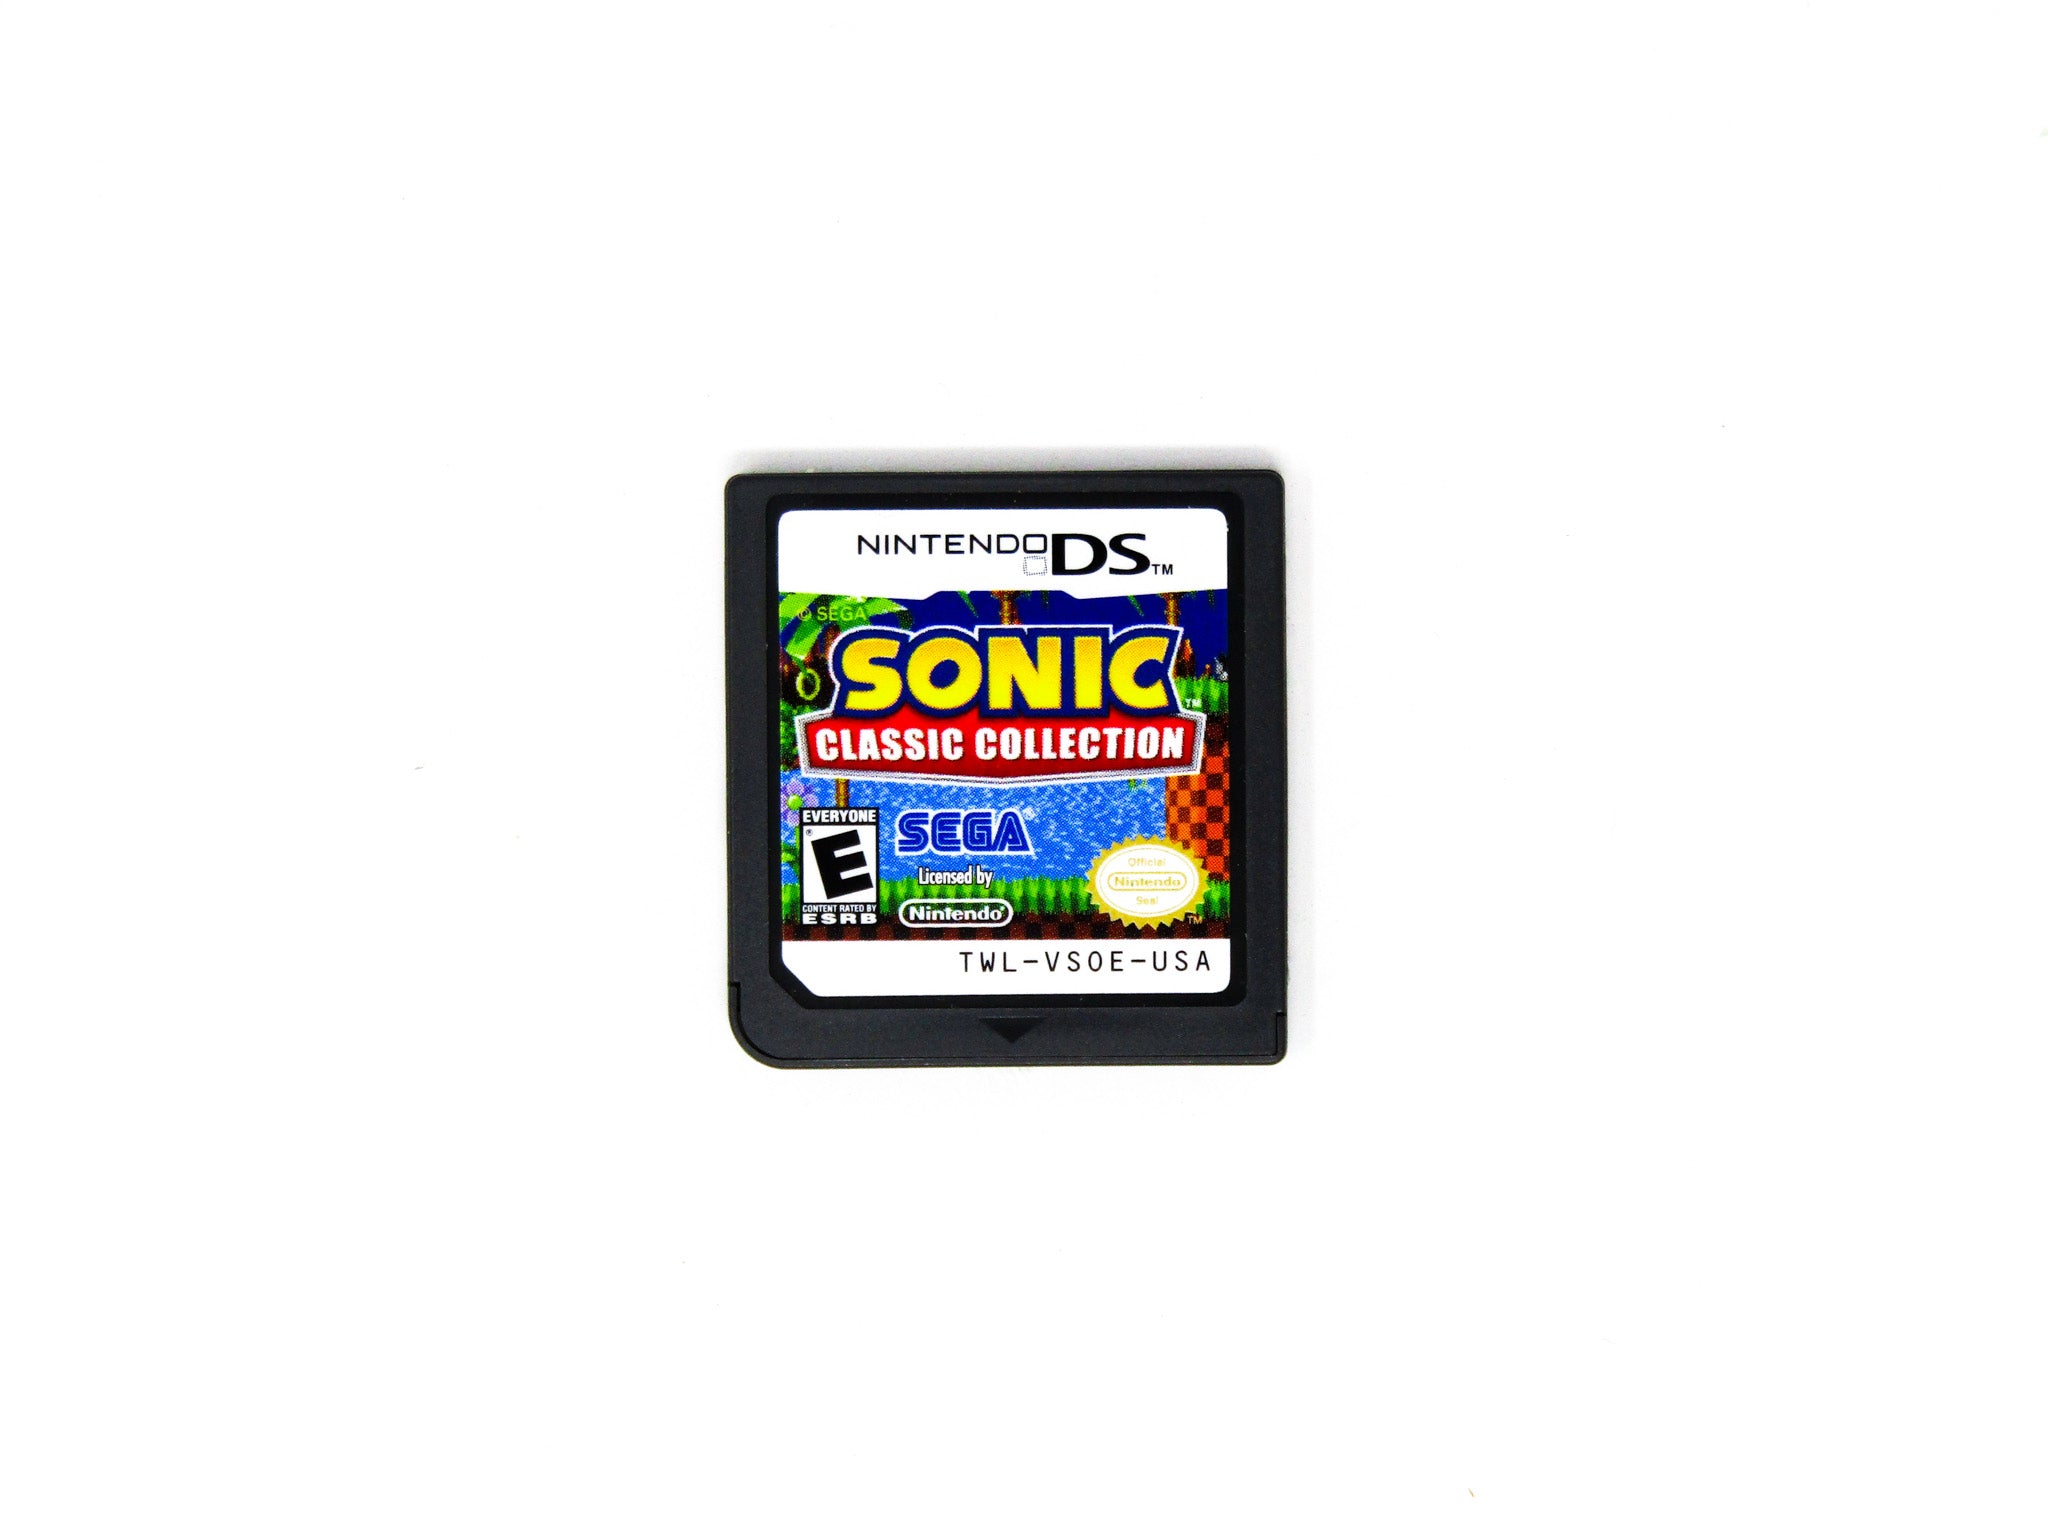 Still have the Sonic Classic Collection box for DS and manual mint  condition got this is like 2012 from my mom on Christmas its one of the  coolest collections out there 10/10 would recommend the DS is the perfect  console for Sonic games! : r